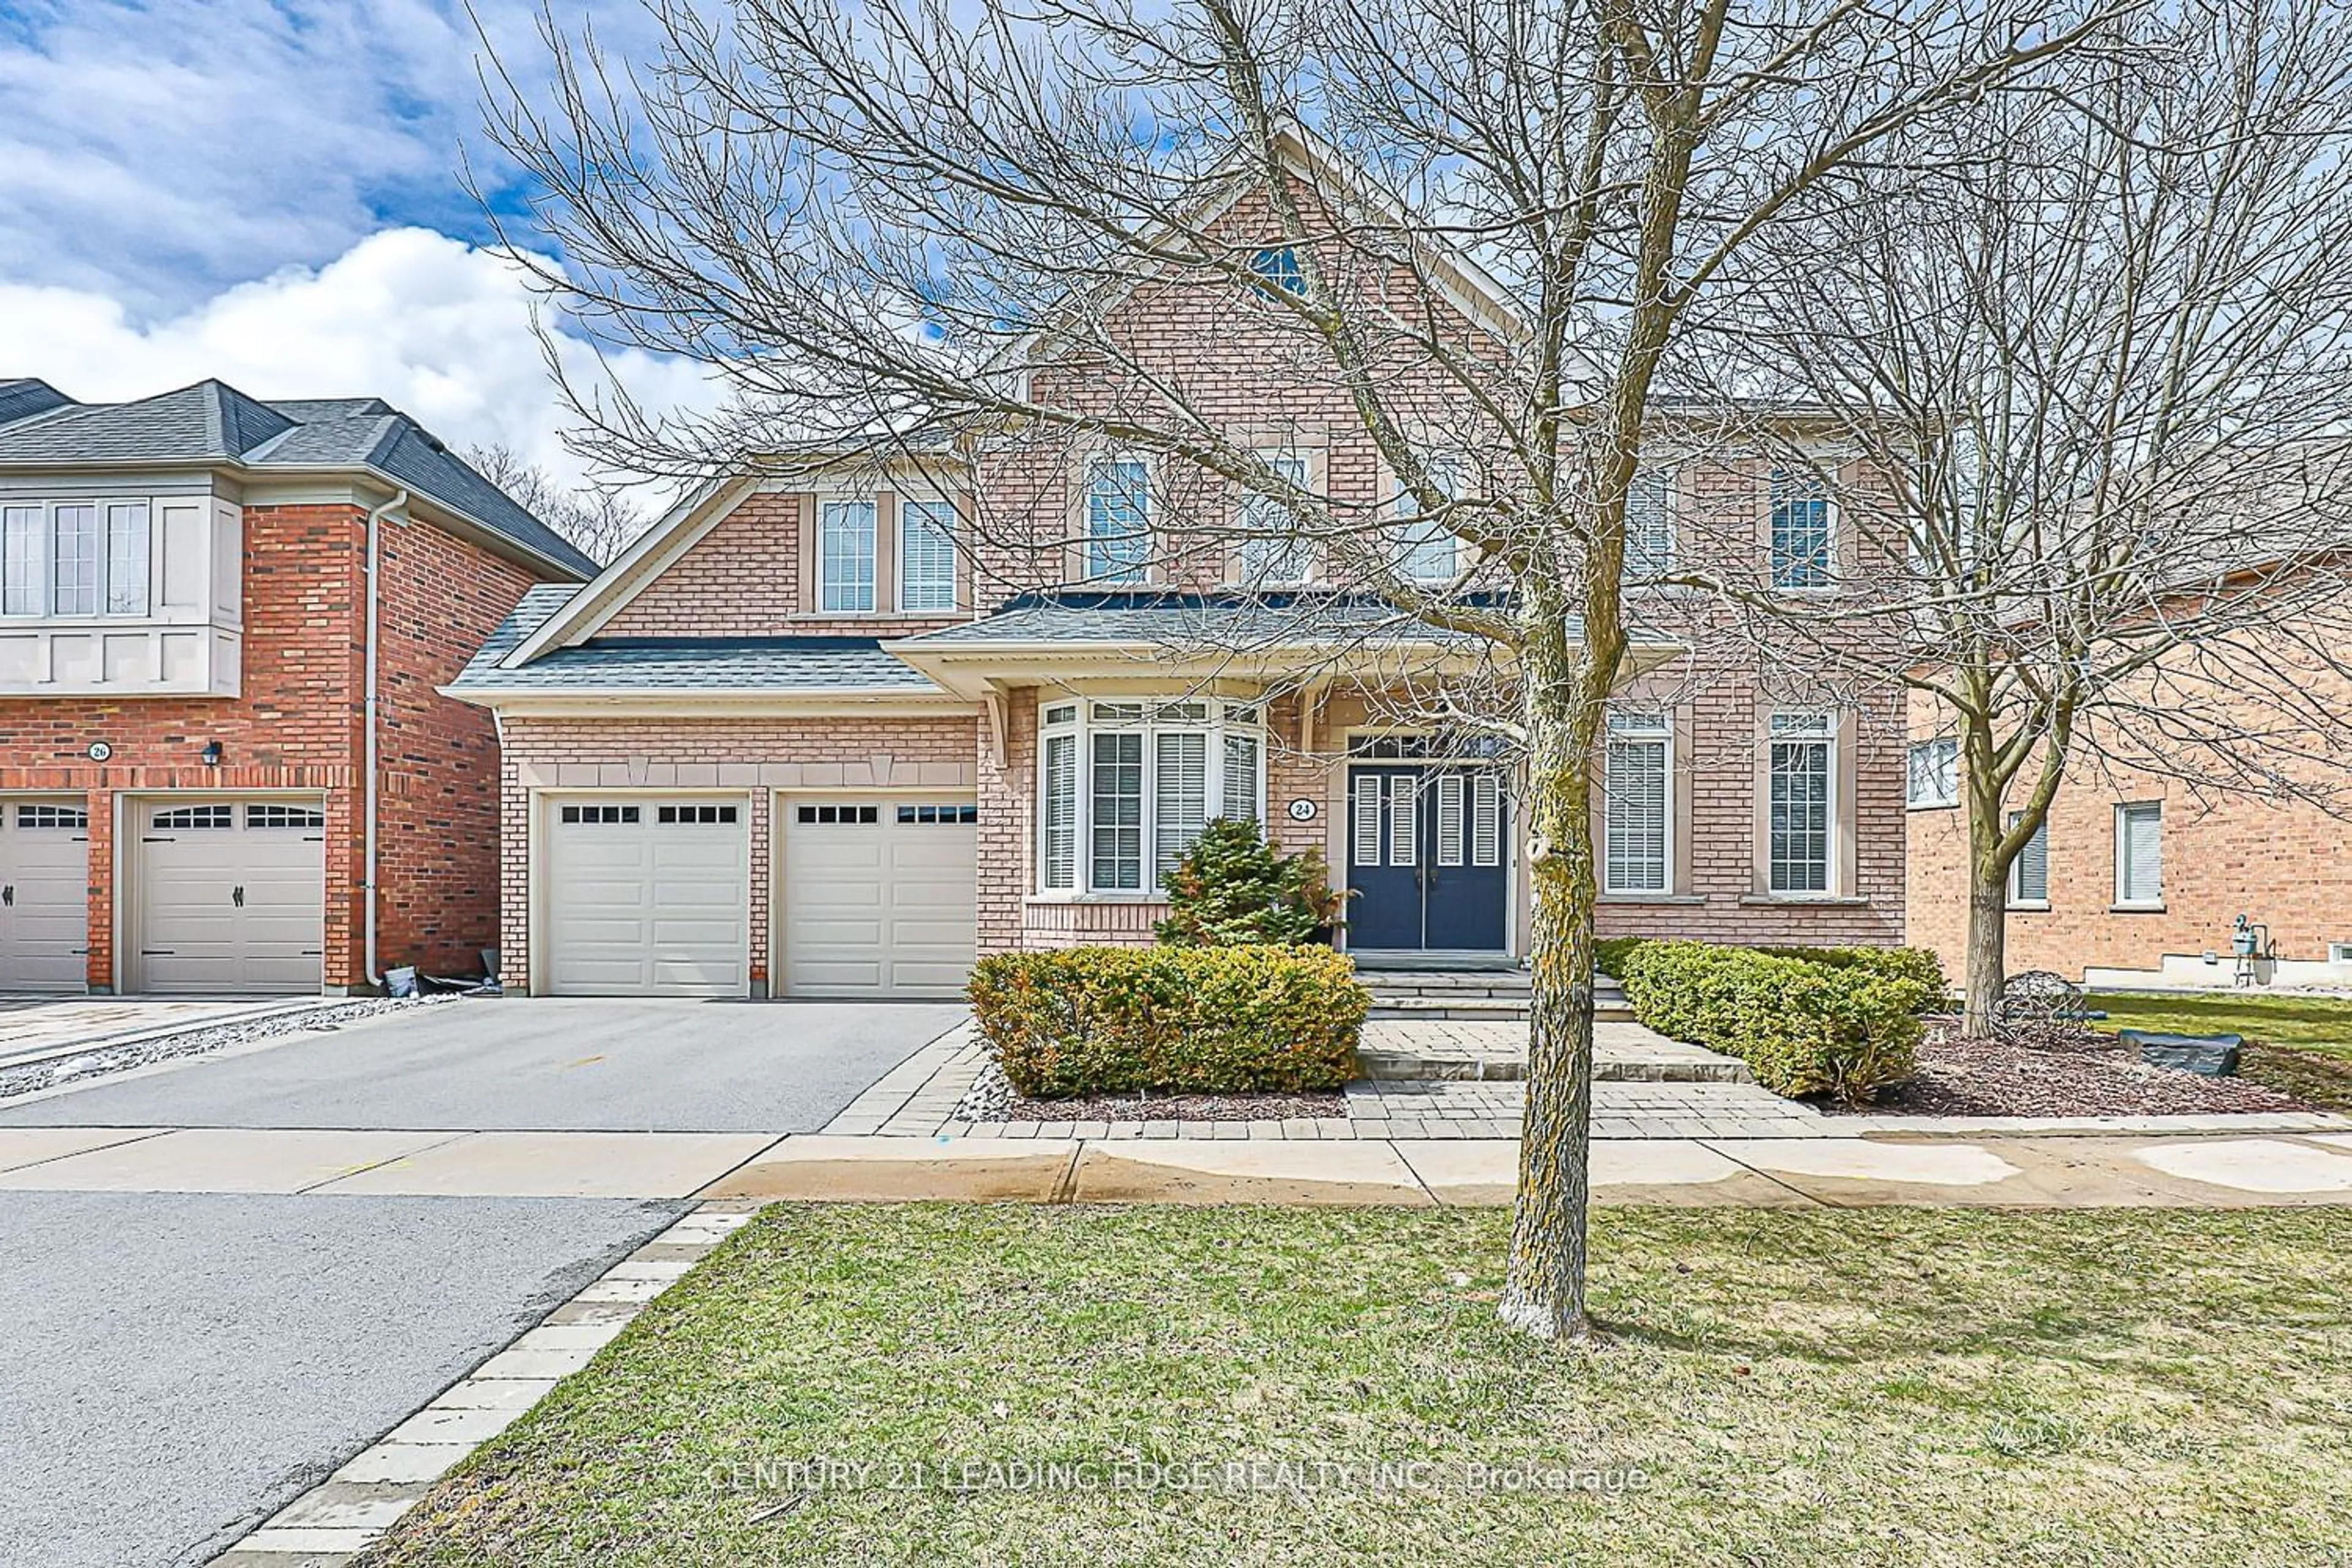 Home with brick exterior material for 24 Crossroads Dr, Richmond Hill Ontario L4E 5C9